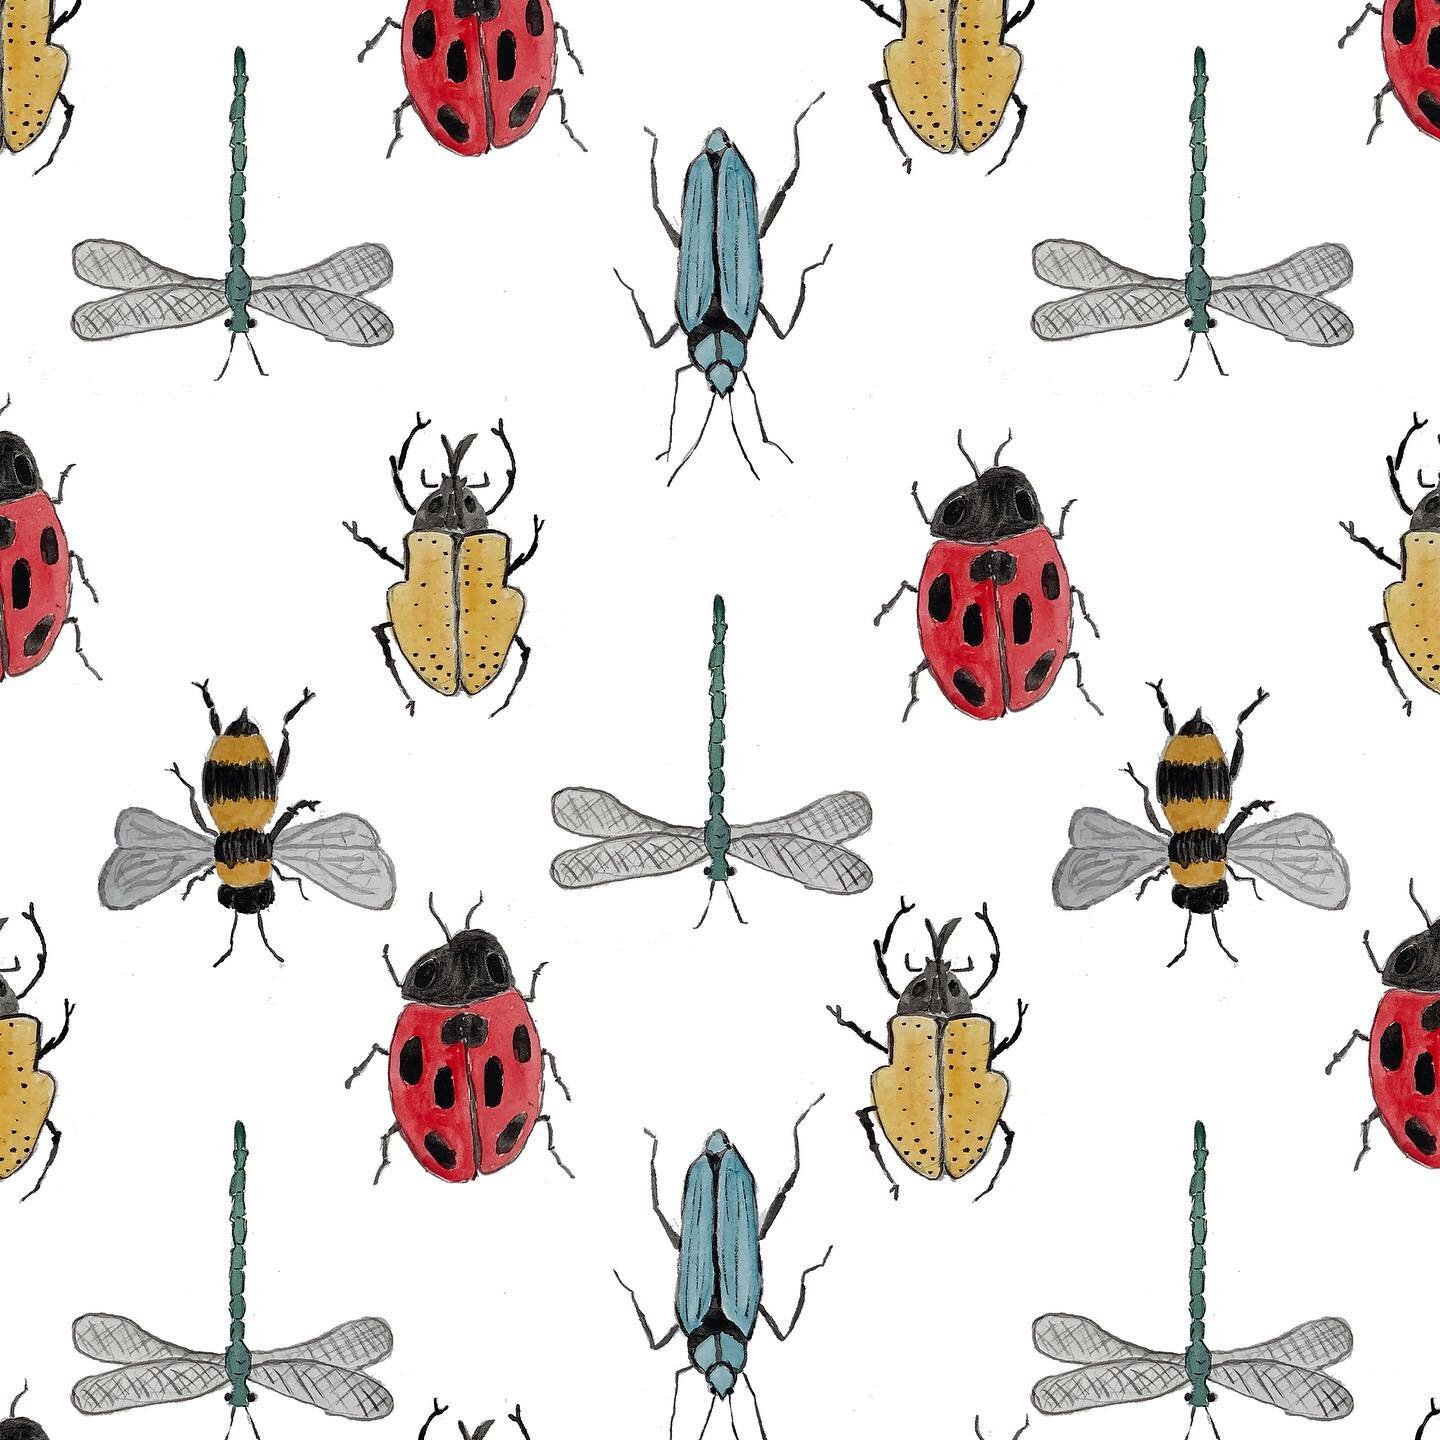 Another one of my fave motifs from my 2021 calendar! 🐝🐞
&bull;
&bull;
&bull;
#jherringdeaign #2021 #bugs #spring #newyear